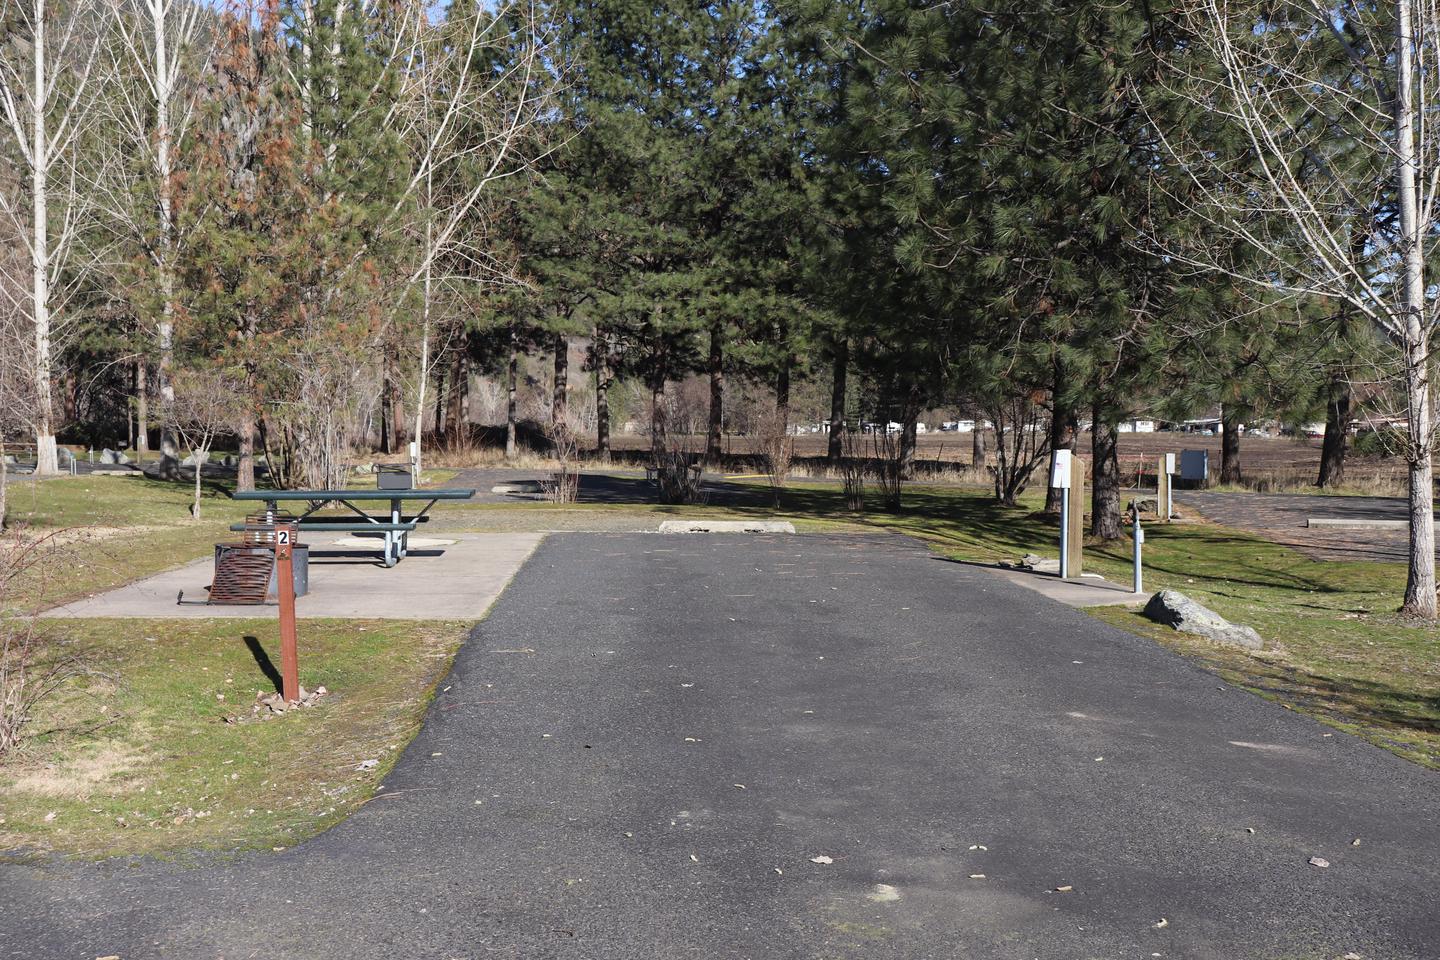 An accessible RV site at Pink House Recreation Site. One of two accessible RV sites offered at Pink House Recreation Site.